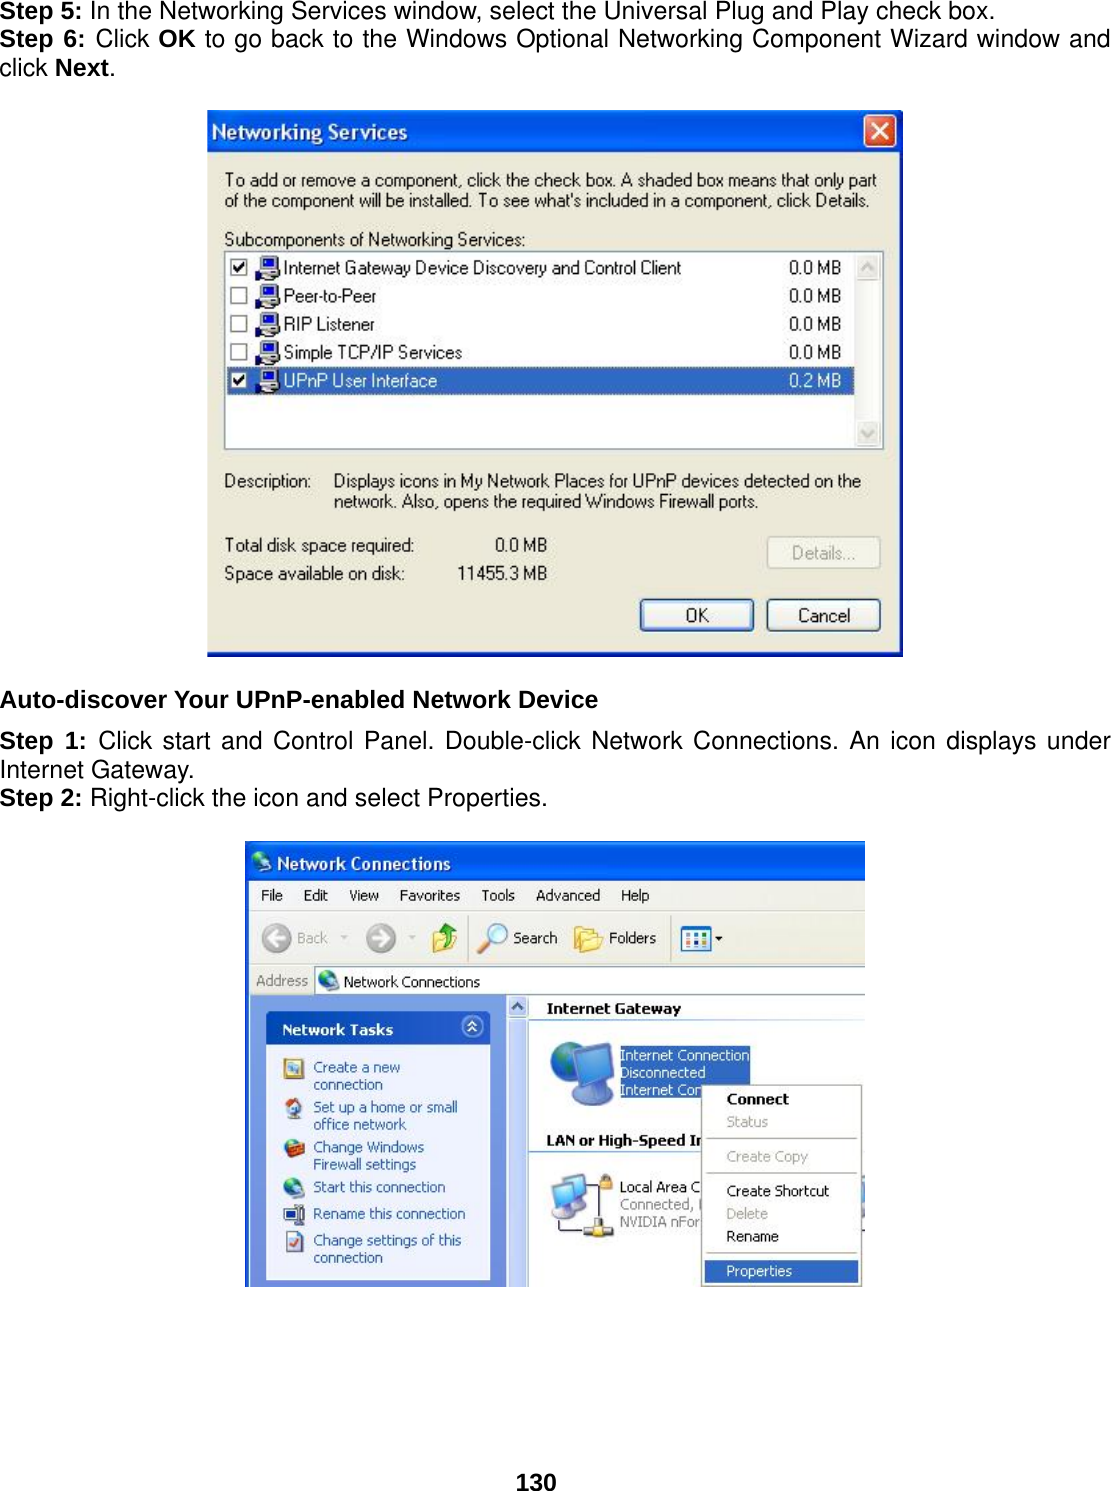  130 Step 5: In the Networking Services window, select the Universal Plug and Play check box. Step 6: Click OK to go back to the Windows Optional Networking Component Wizard window and click Next.     Auto-discover Your UPnP-enabled Network Device Step 1: Click start and Control Panel. Double-click Network Connections. An icon displays under Internet Gateway. Step 2: Right-click the icon and select Properties.         